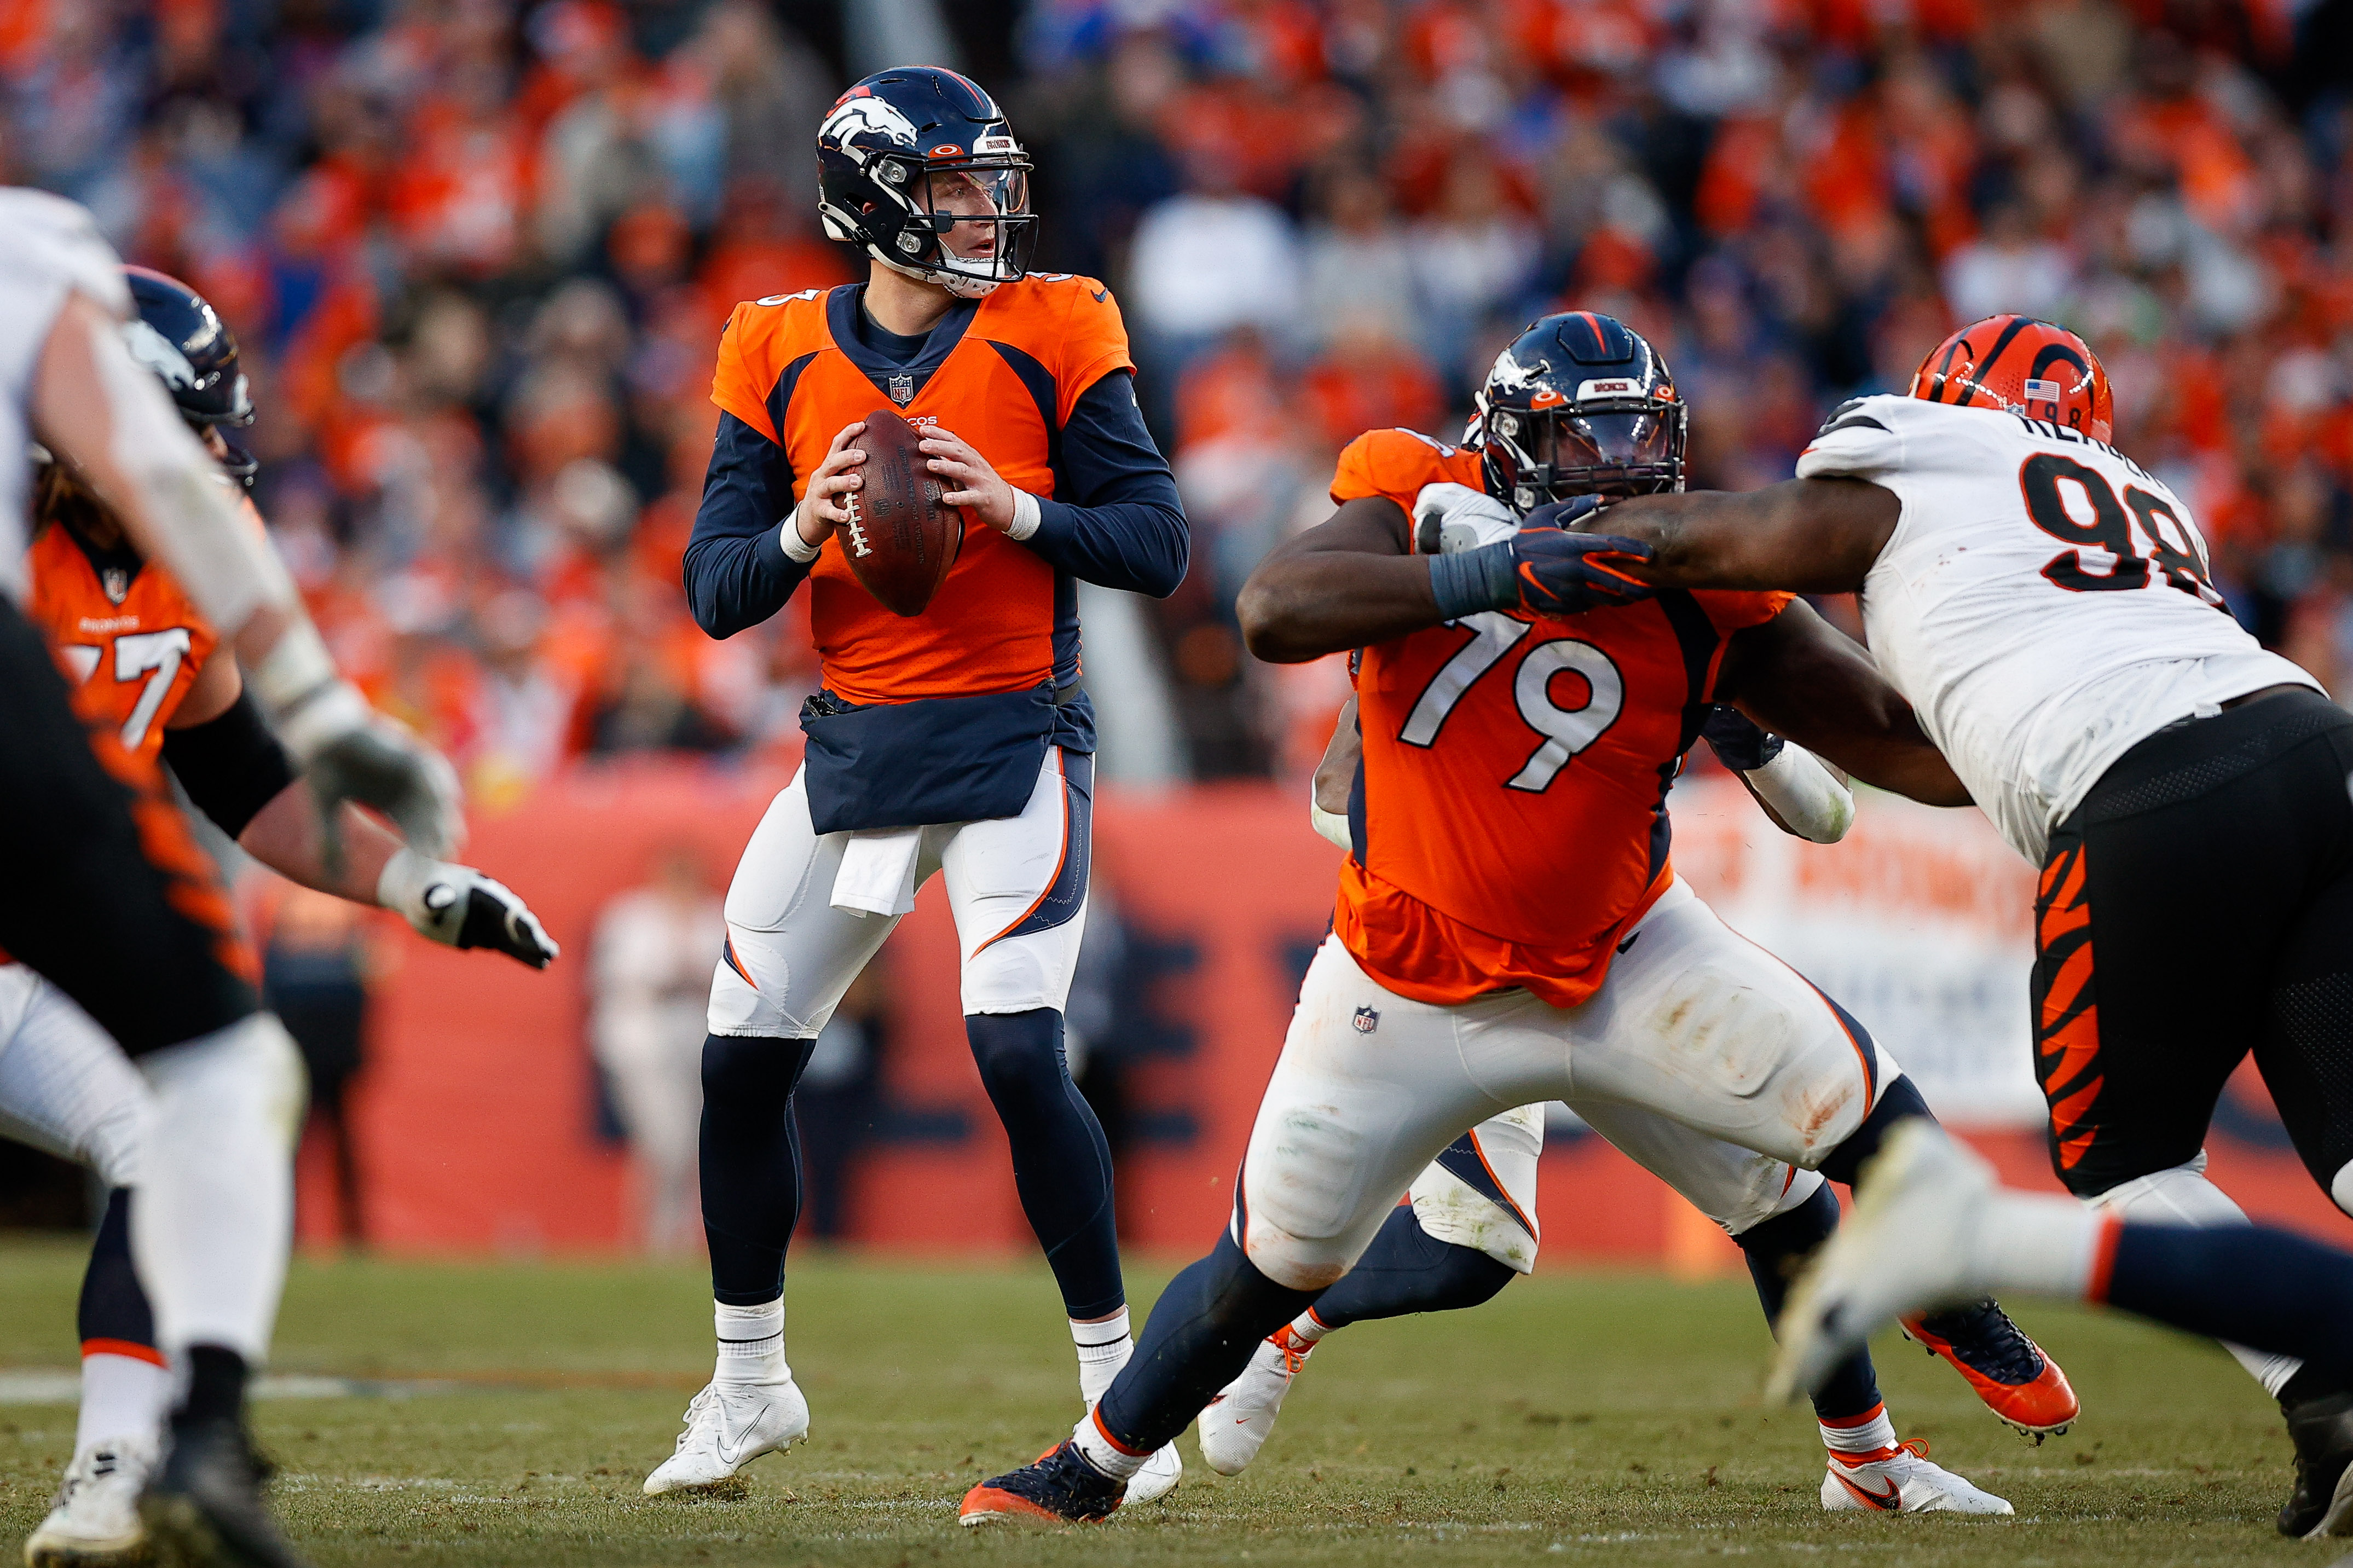 Denver Broncos quarterback Drew Lock (3) looks to pass as center Lloyd Cushenberry III (79) defends against Cincinnati Bengals defensive tackle Tyler Shelvin (99) in the third quarter at Empower Field at Mile High.